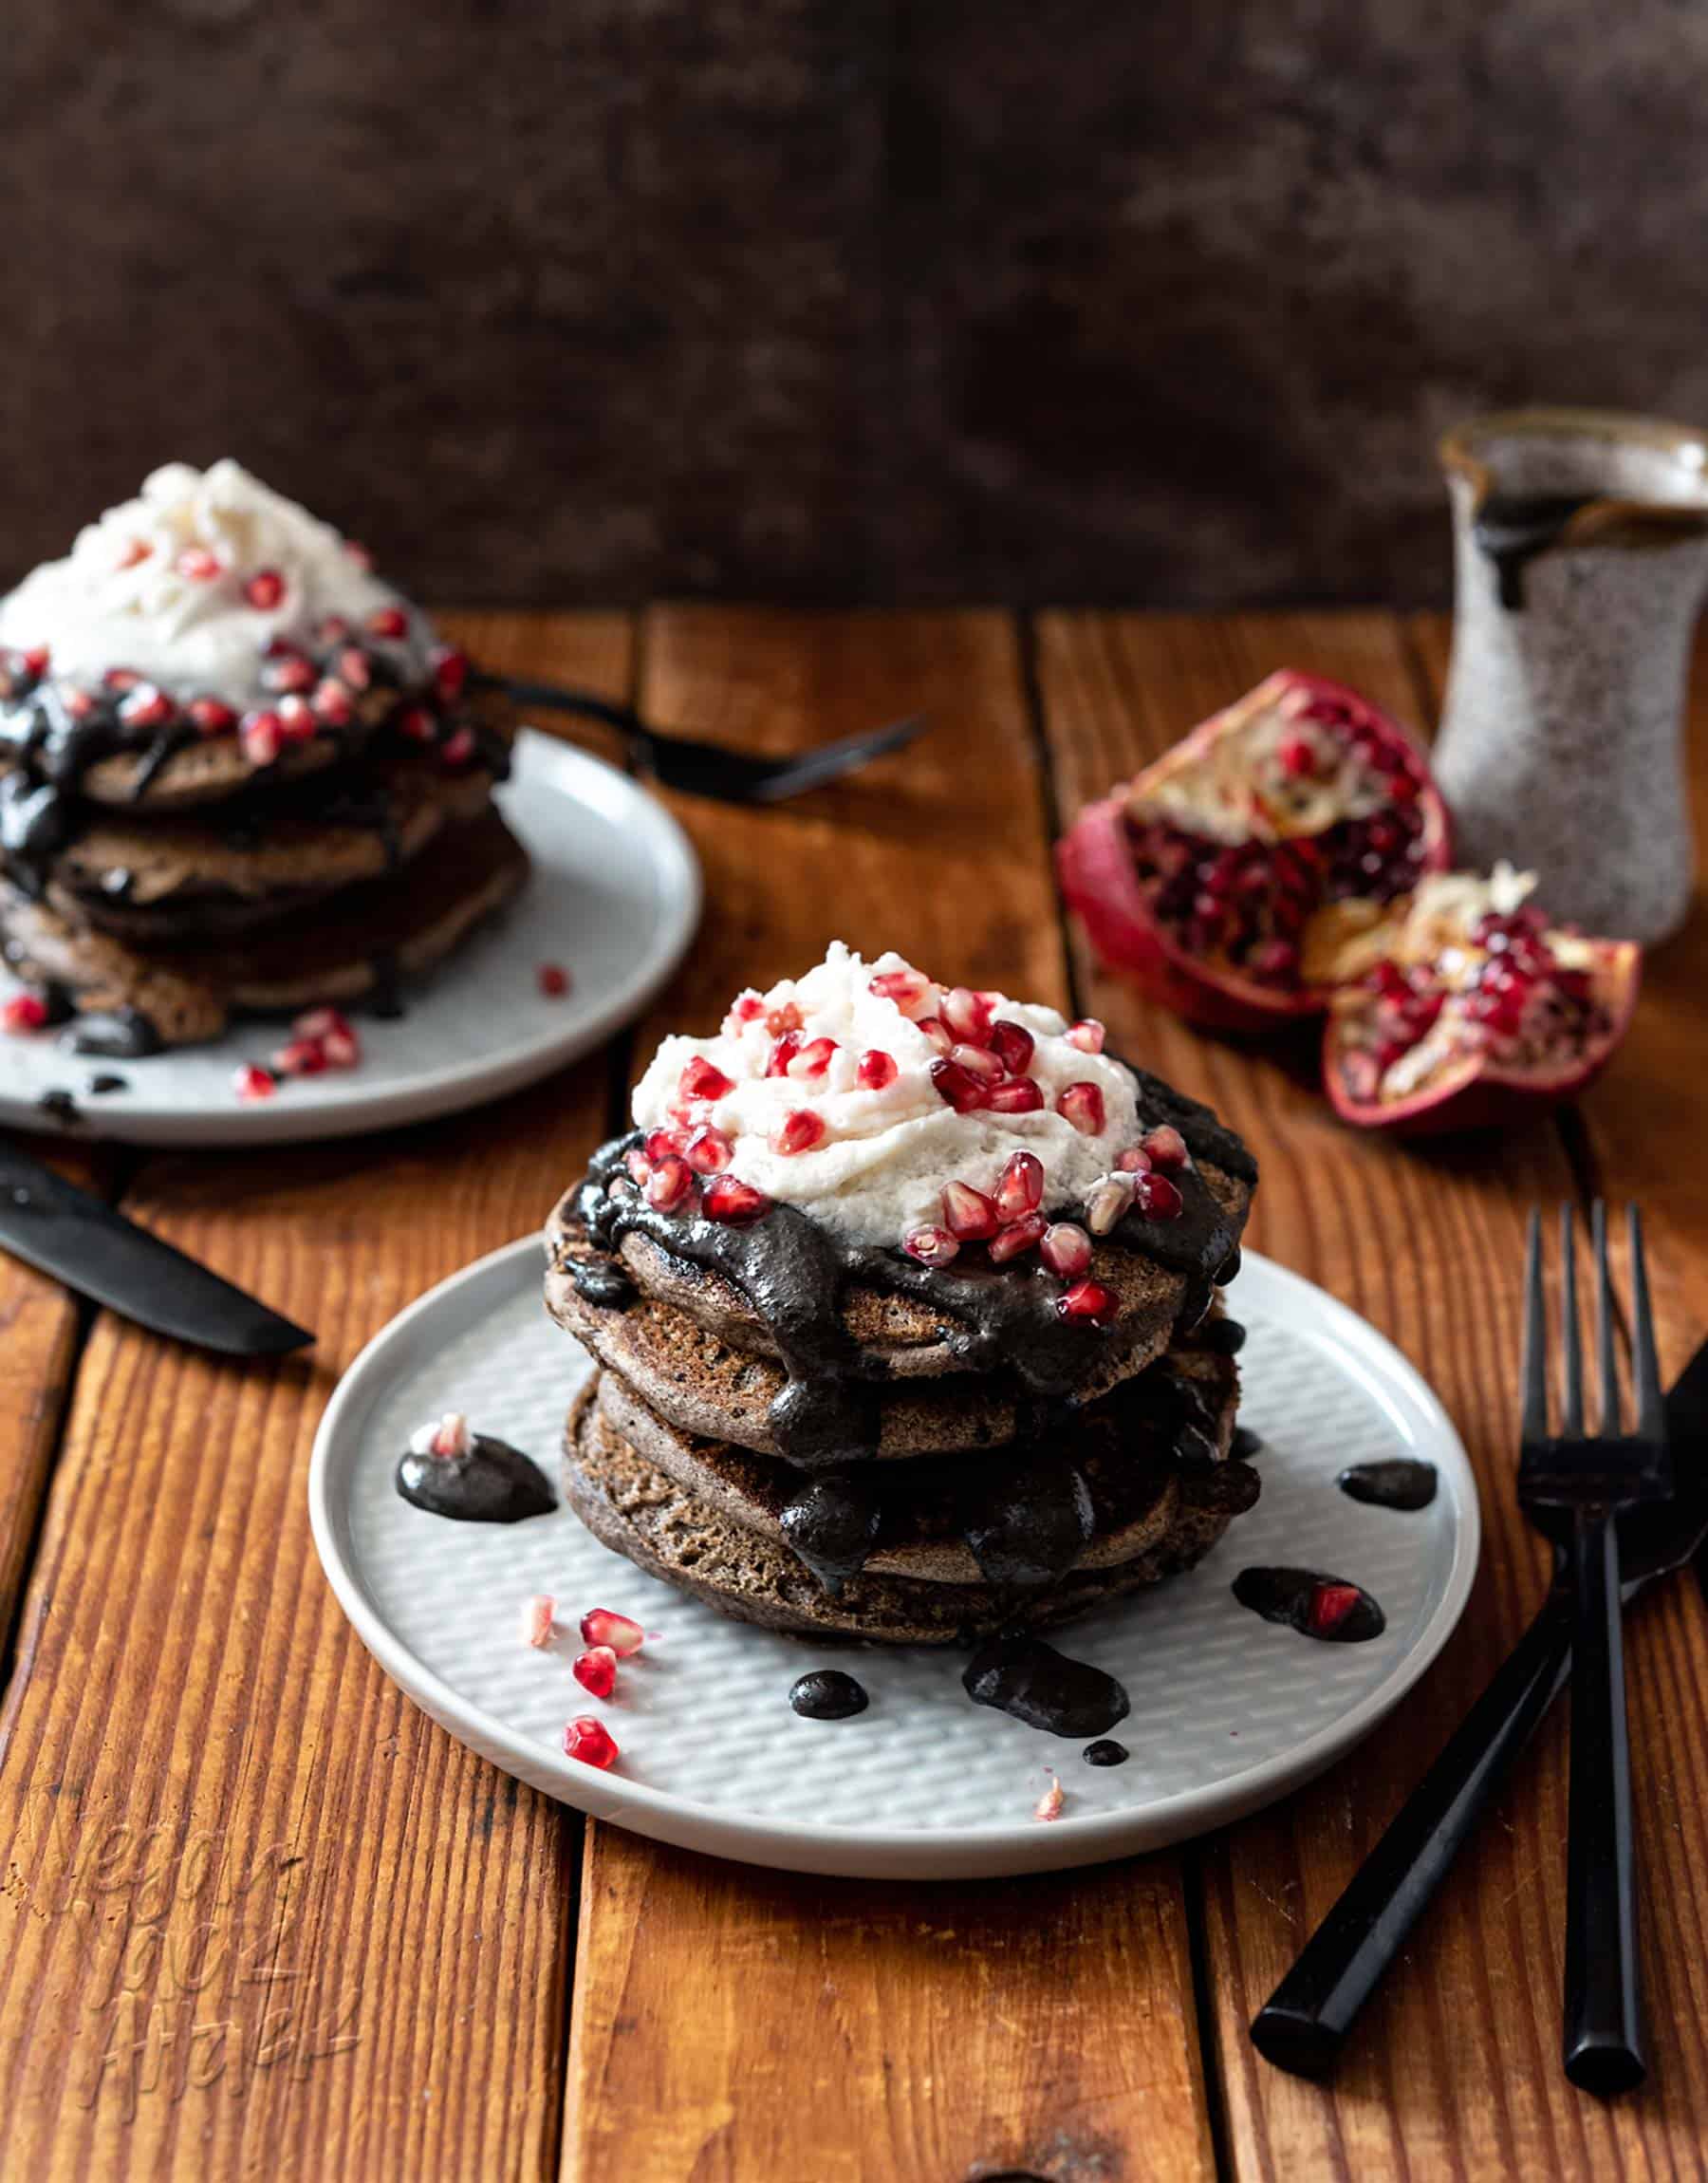 These Spooky Buckwheat Pancakes are eye-catching and delicious! Fluffy pancakes drizzled with a sweet black sesame sauce and topped with pomegranates, what more could you want? #Vegan #nutfree #glutenfreeoption #soyfree #halloween #veganrecipes